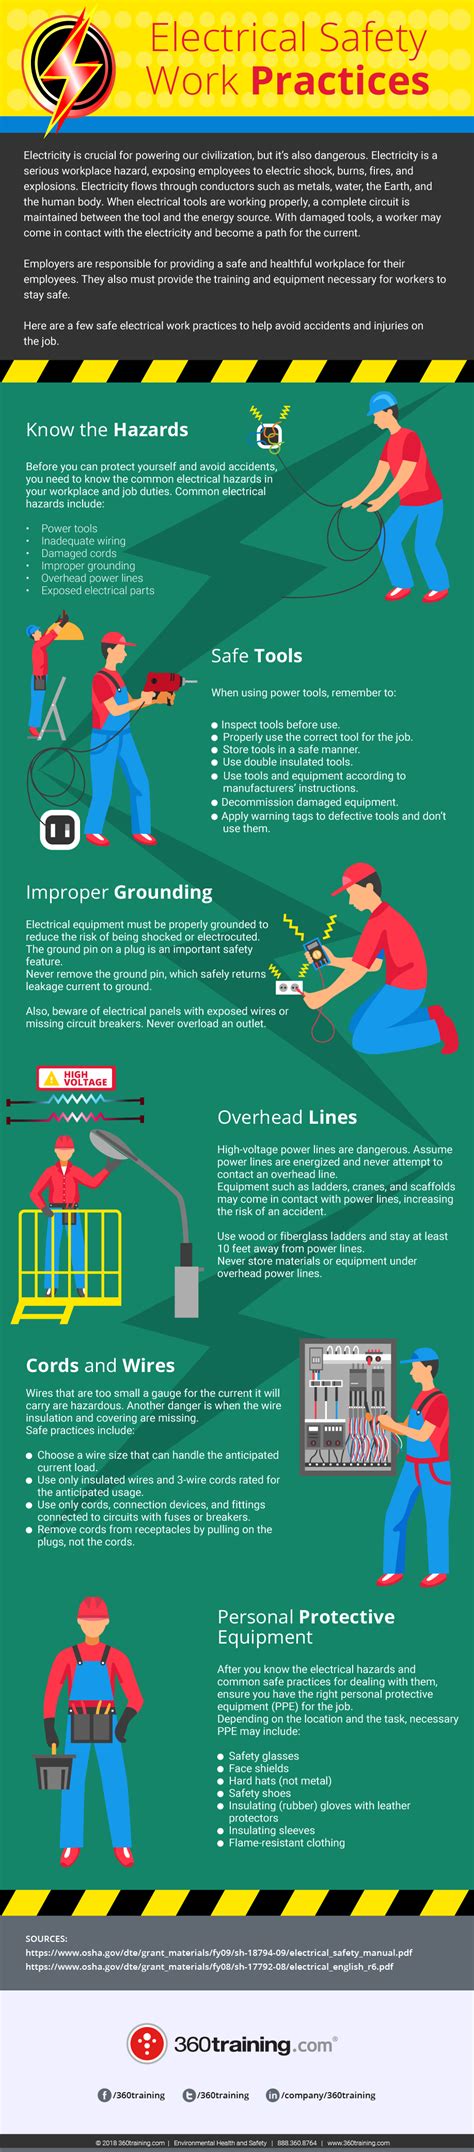 Electrical Safety At Work Infographic